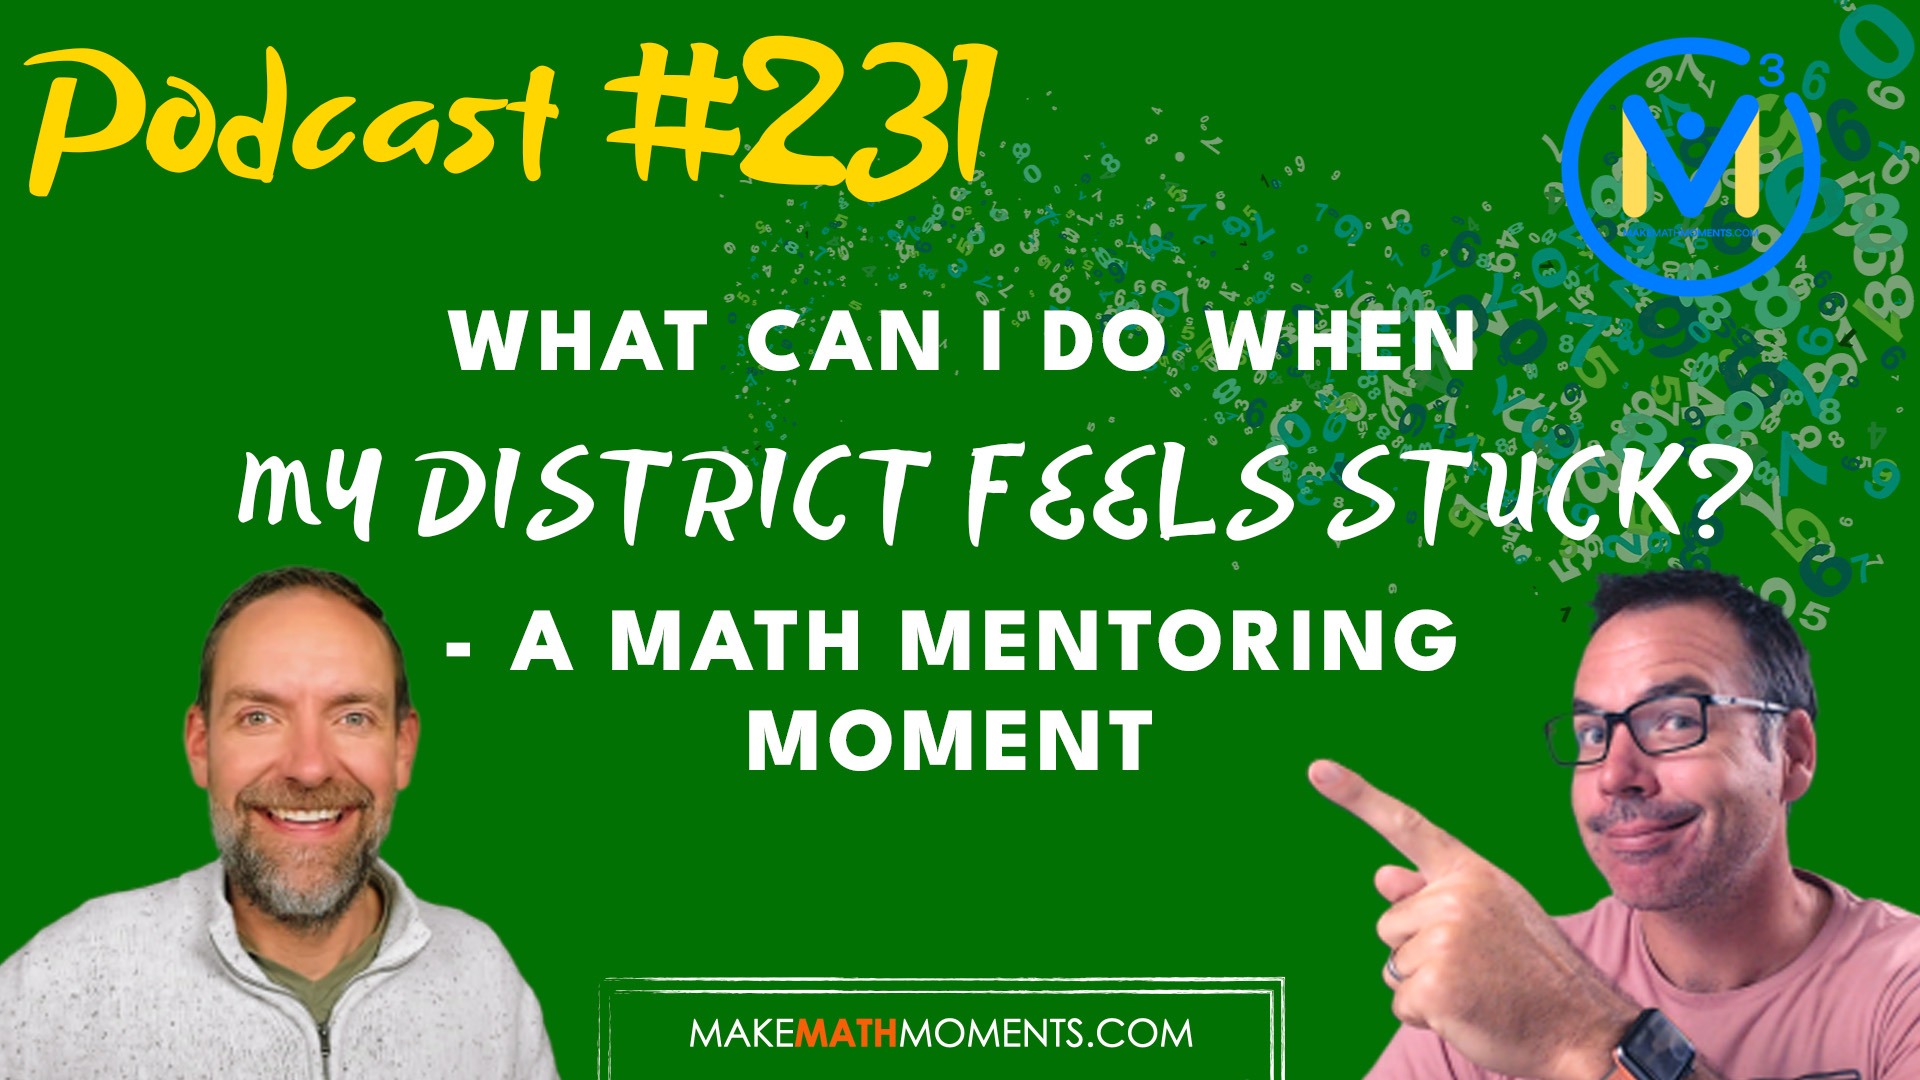 Episode 231: What Can I Do When My District Feels Stuck? – A Math Mentoring Moment